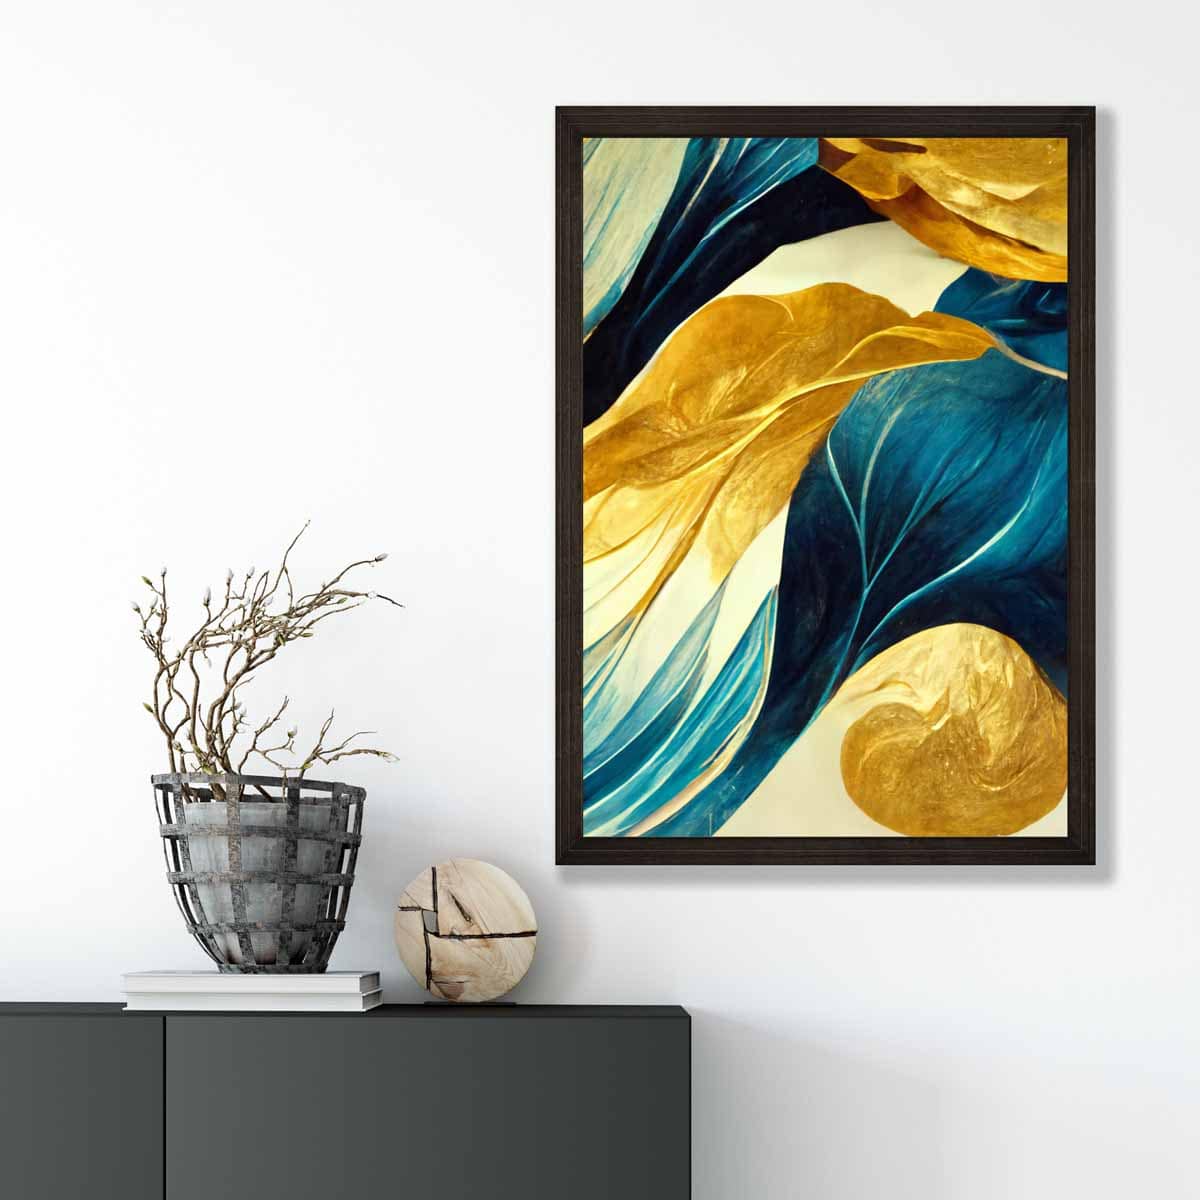 Abstract Art Print in Yellow Beige and Blue No 2